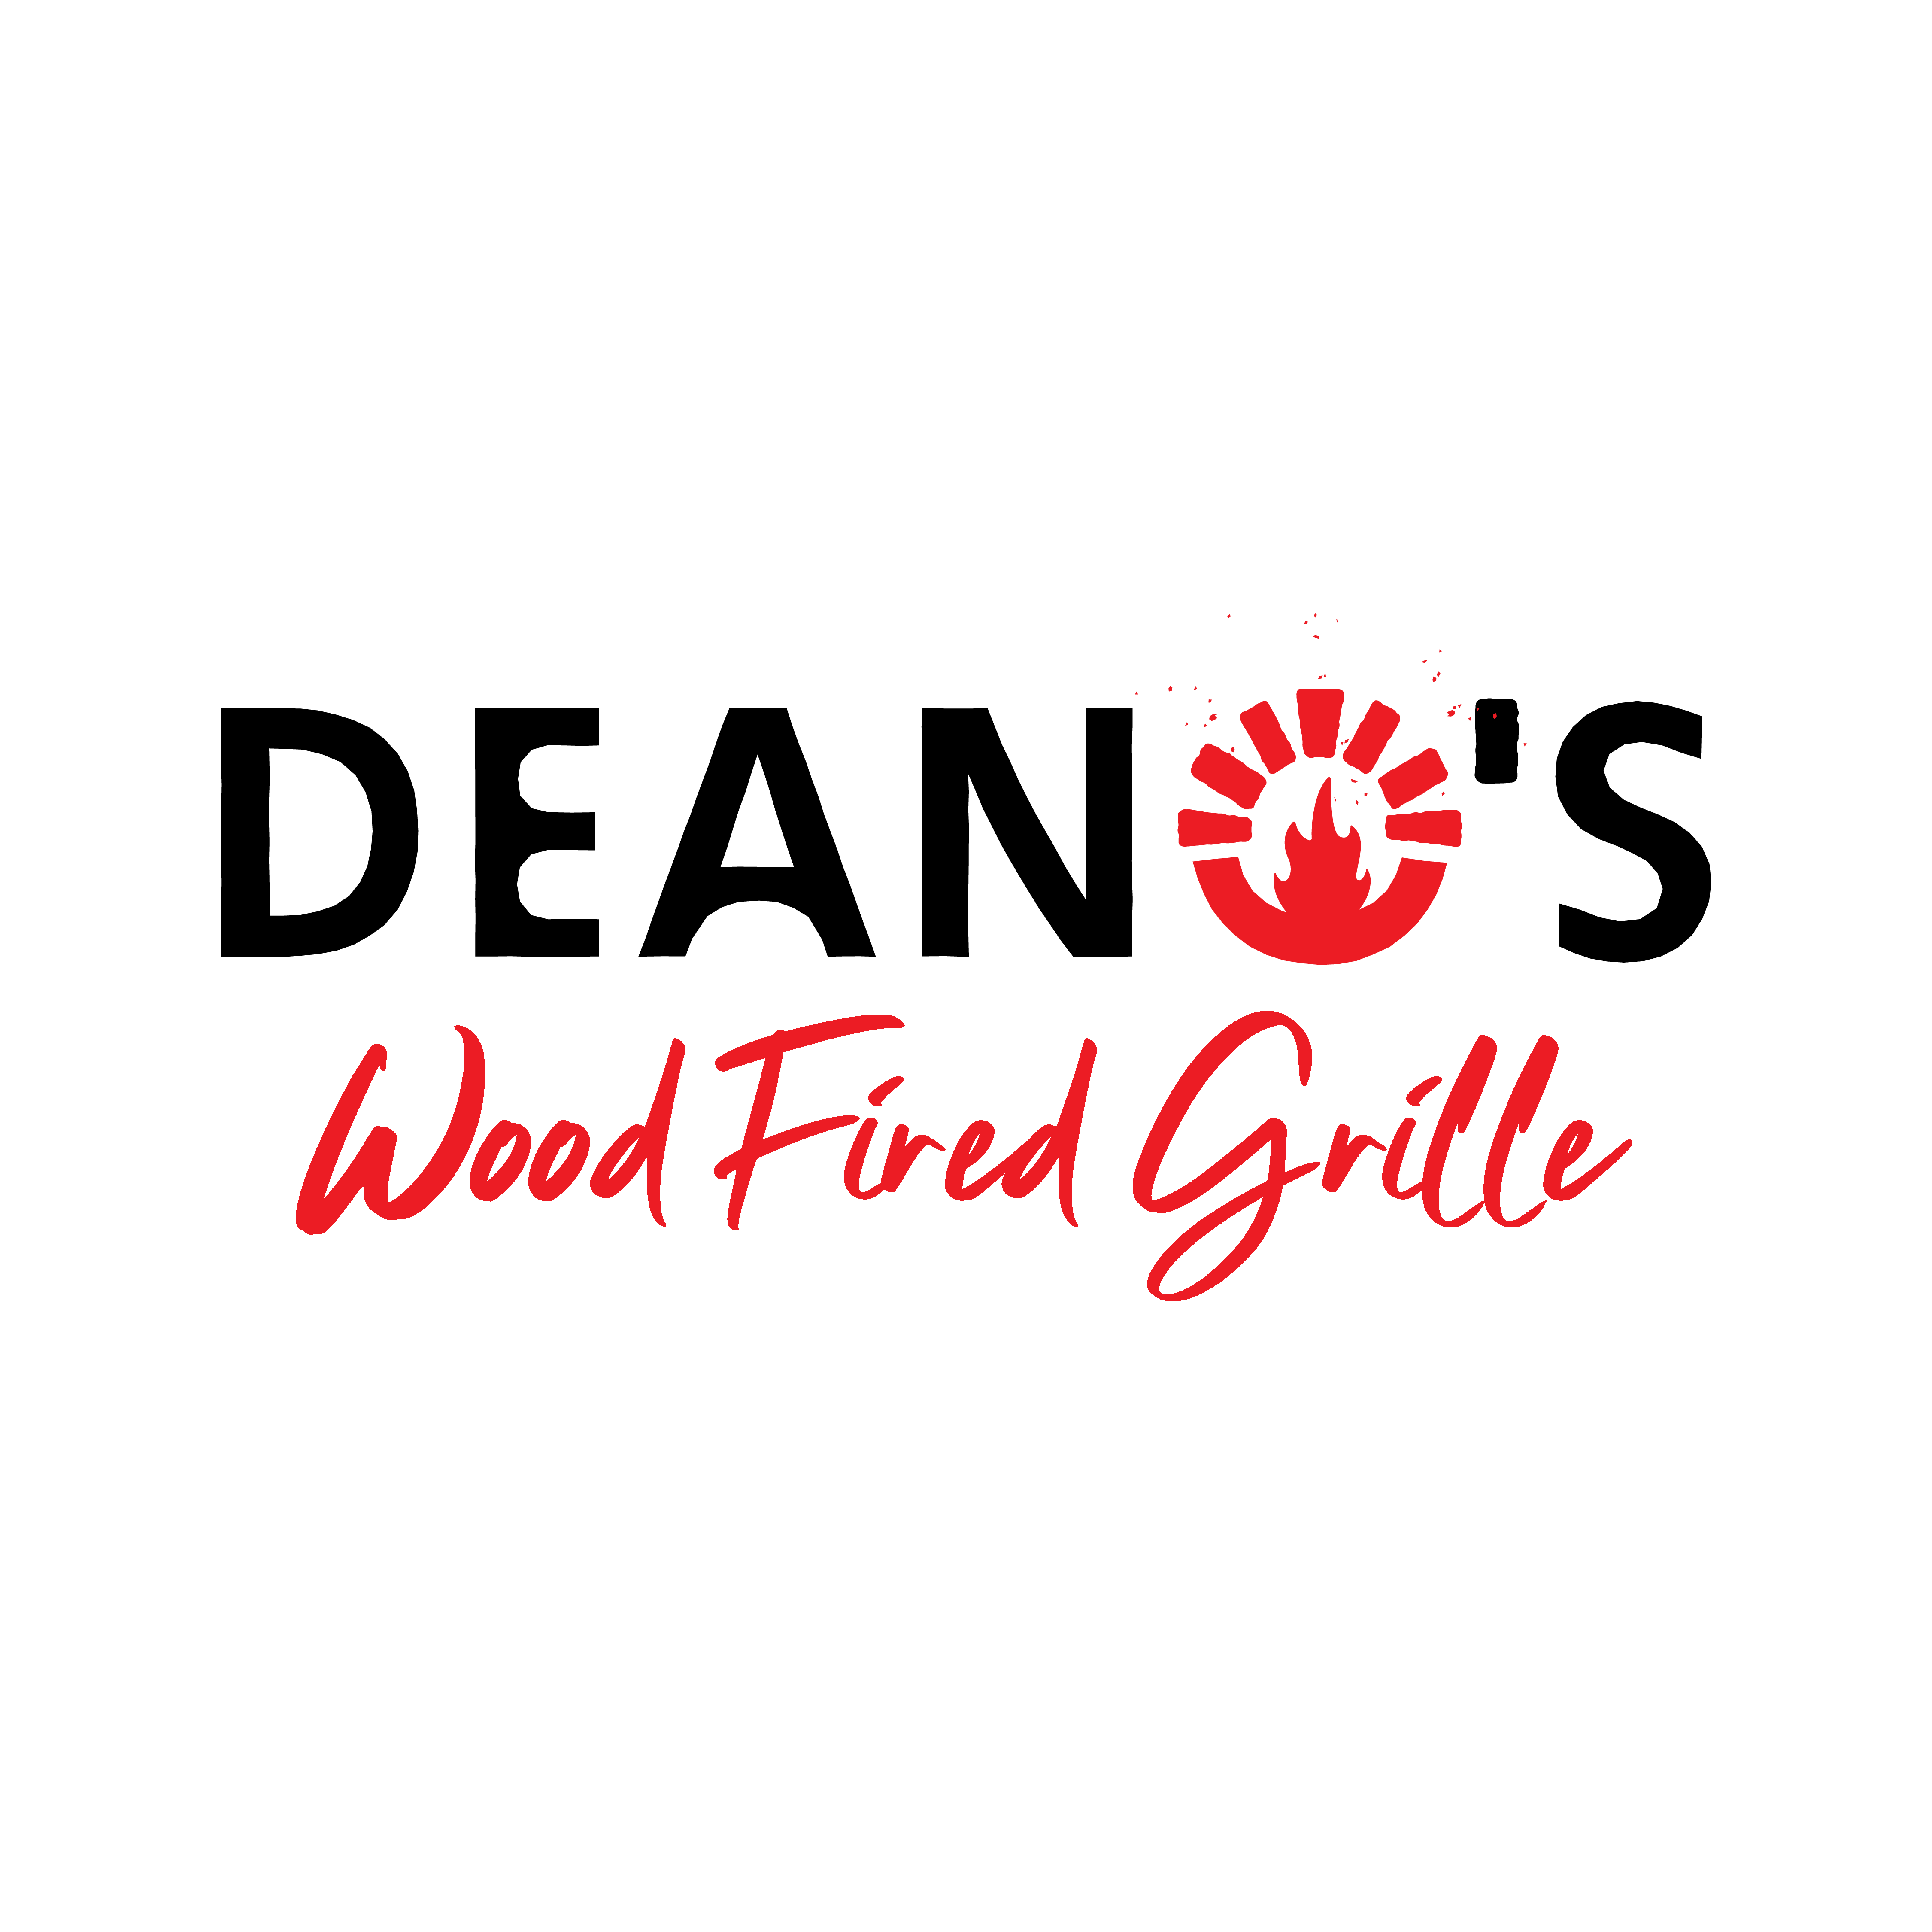 Deano's Wood Fired Grille